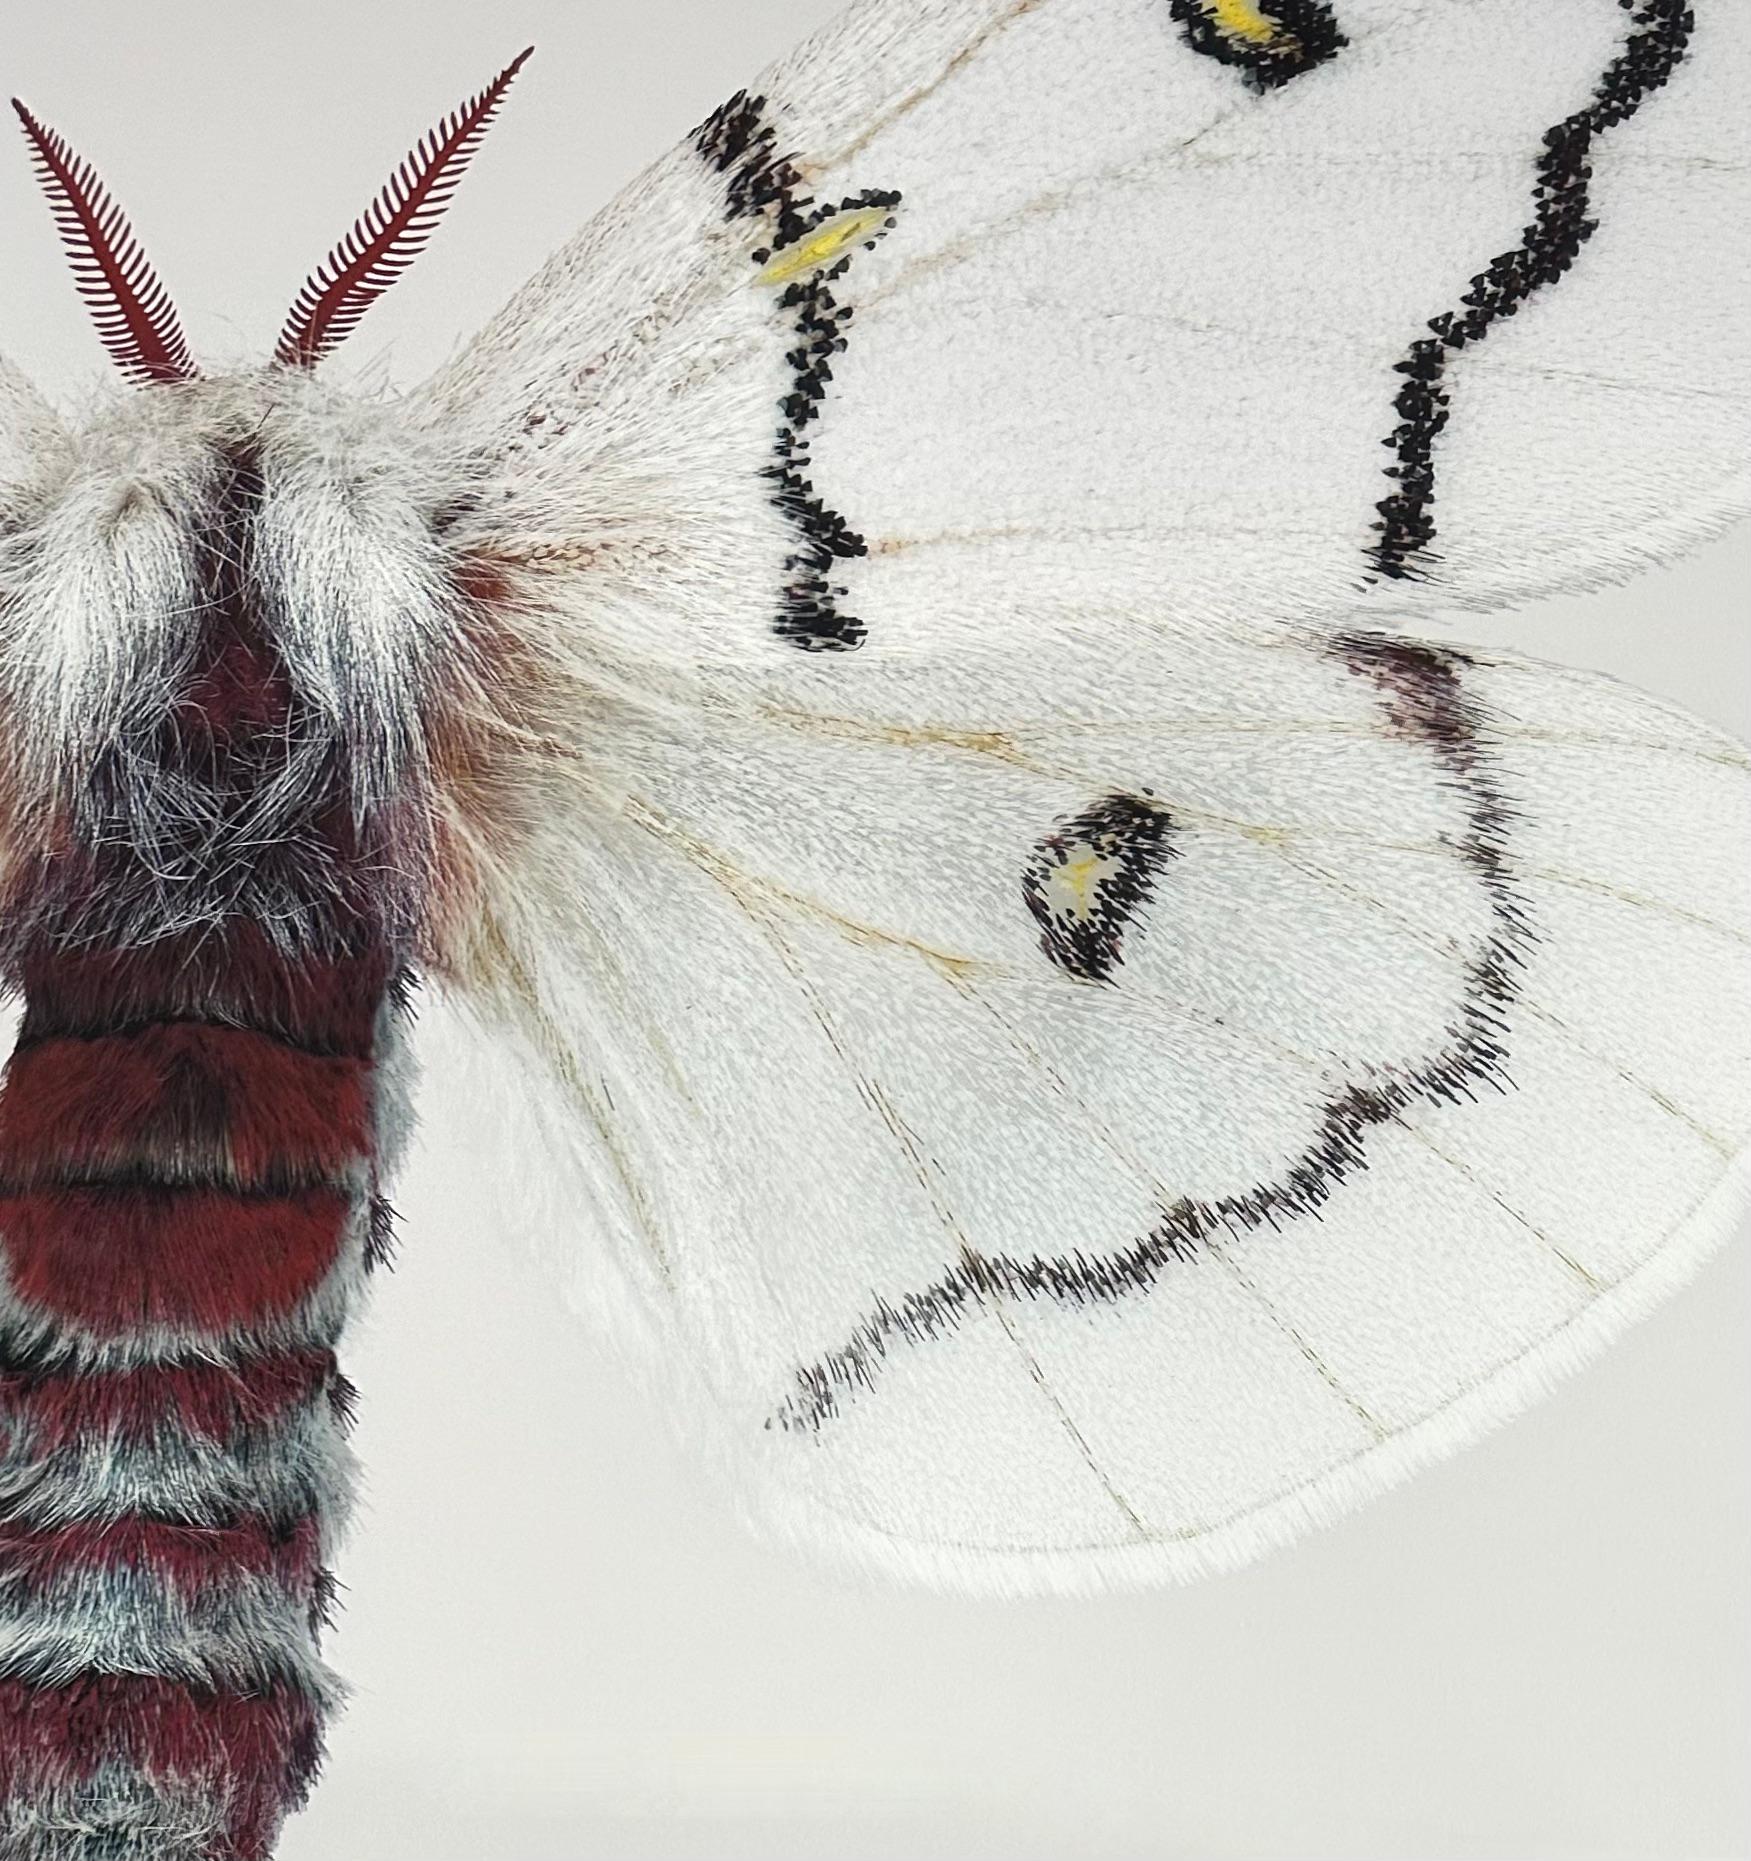 Hemileuca Neomoegeni White, Yellow, Black Stripes Moth Insect Wings Nature - Contemporary Photograph by Joseph Scheer